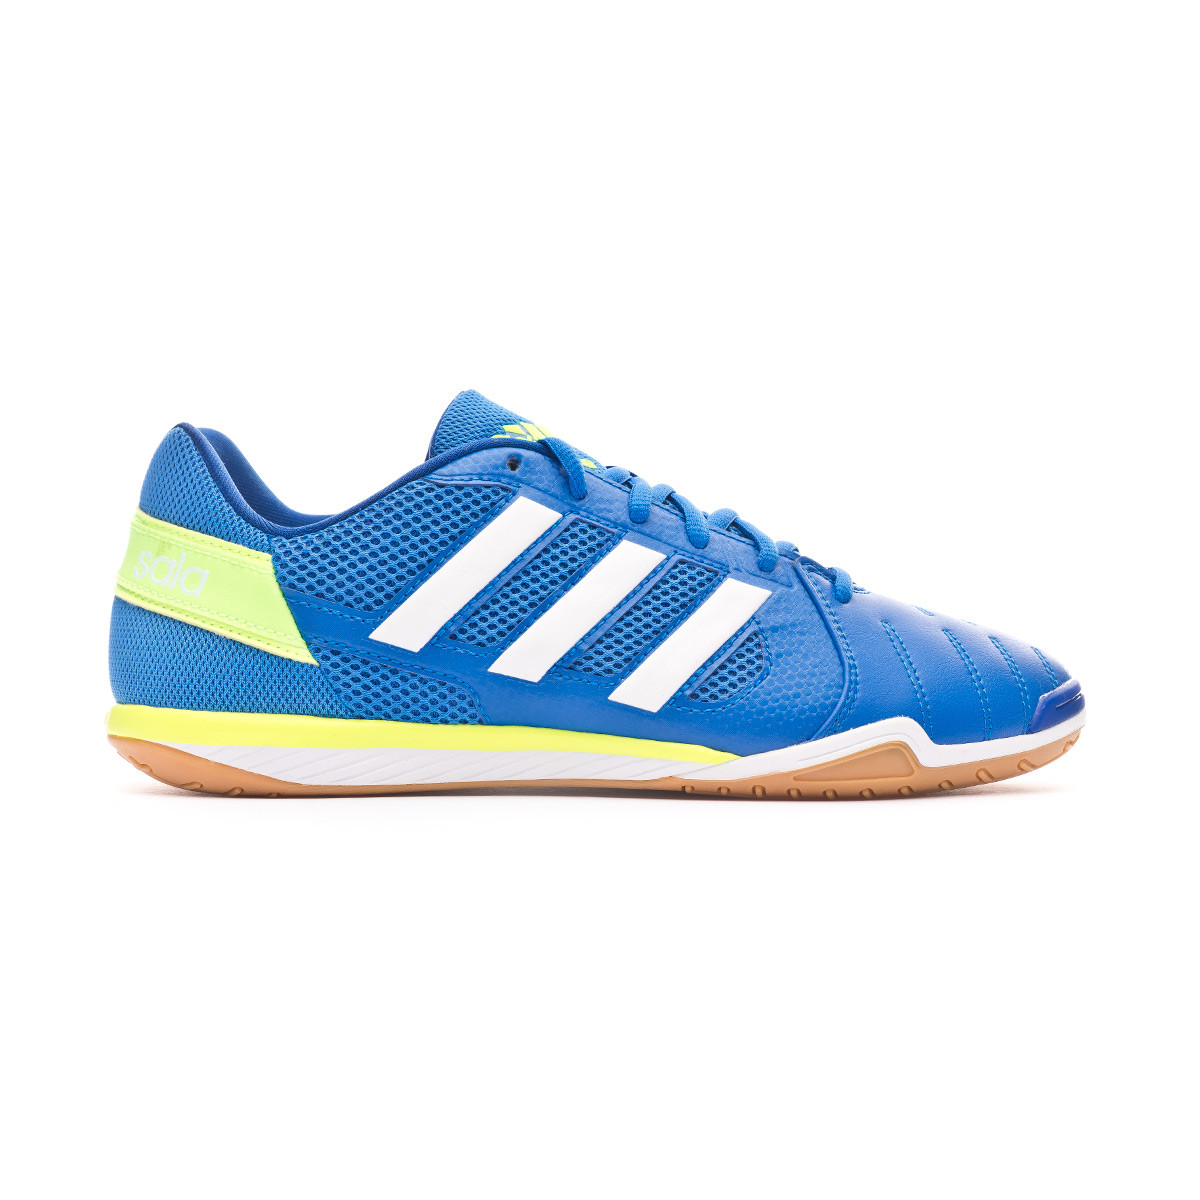 Indoor boots adidas Top Glory Blue-White-Royal Blue Fútbol